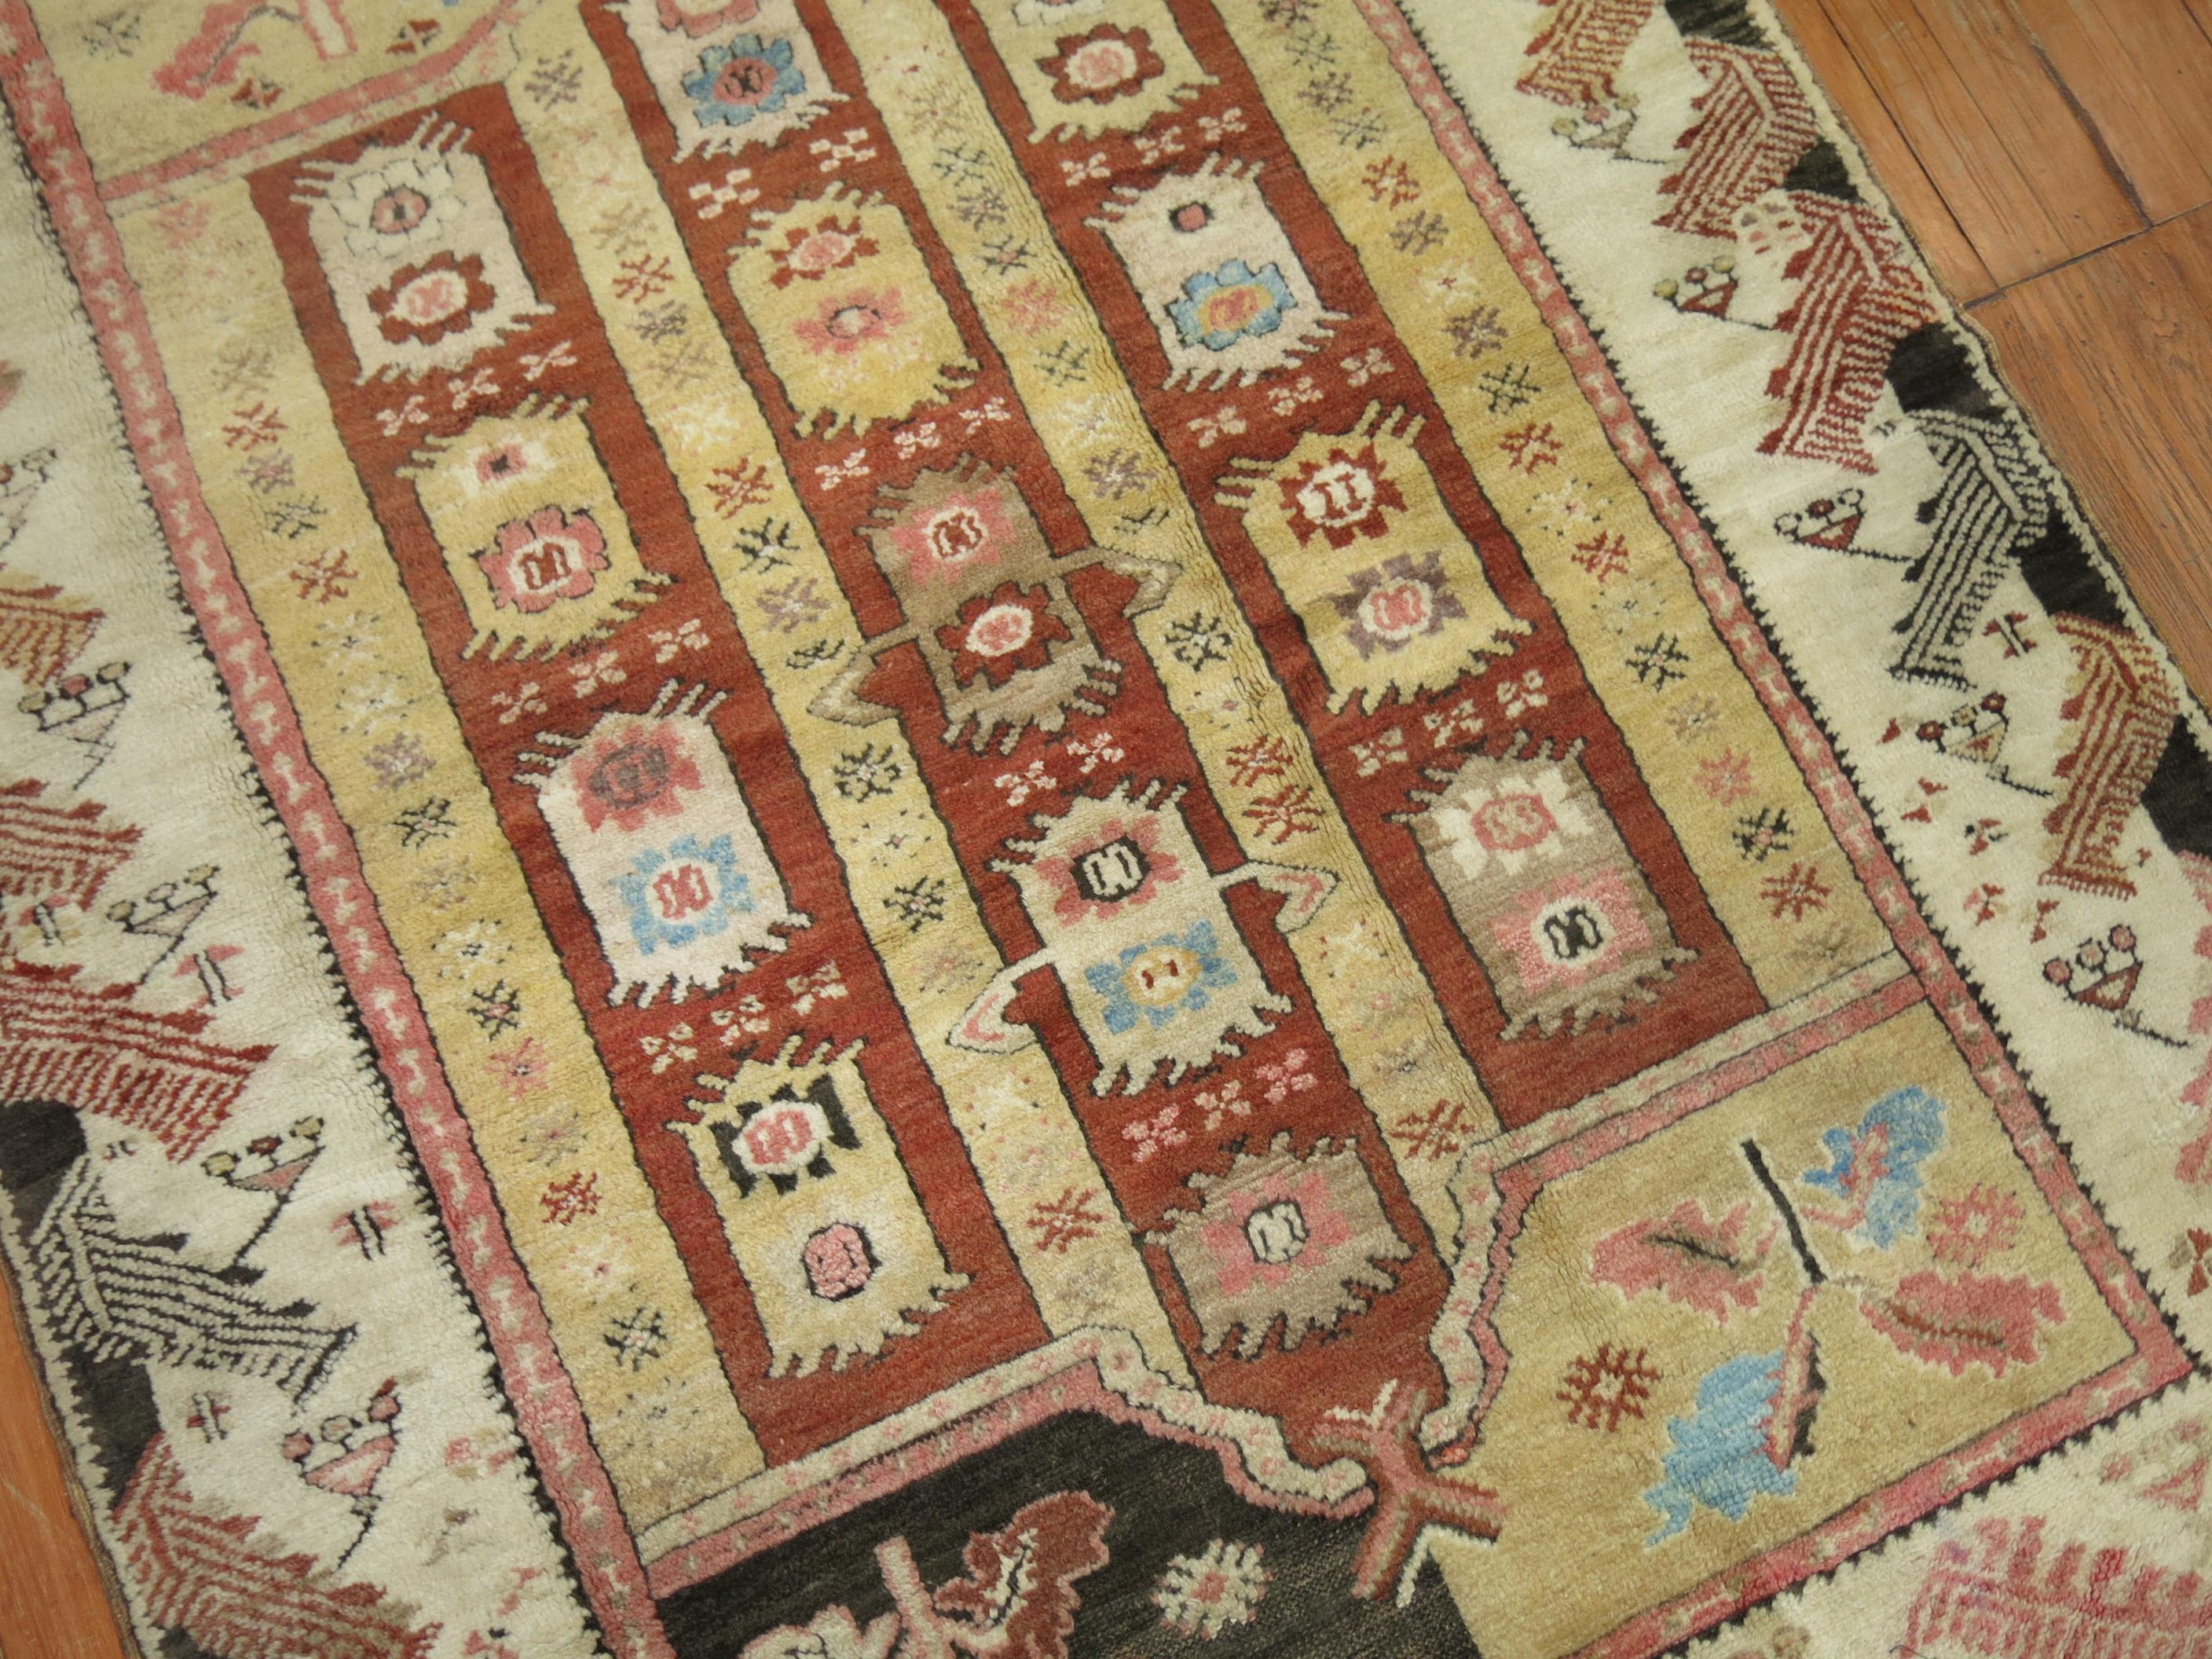 A whimiscal Turkish Scatter size rug from the 1st quarter of the 20th Century

Measures: 4'3'' x 5'6''.